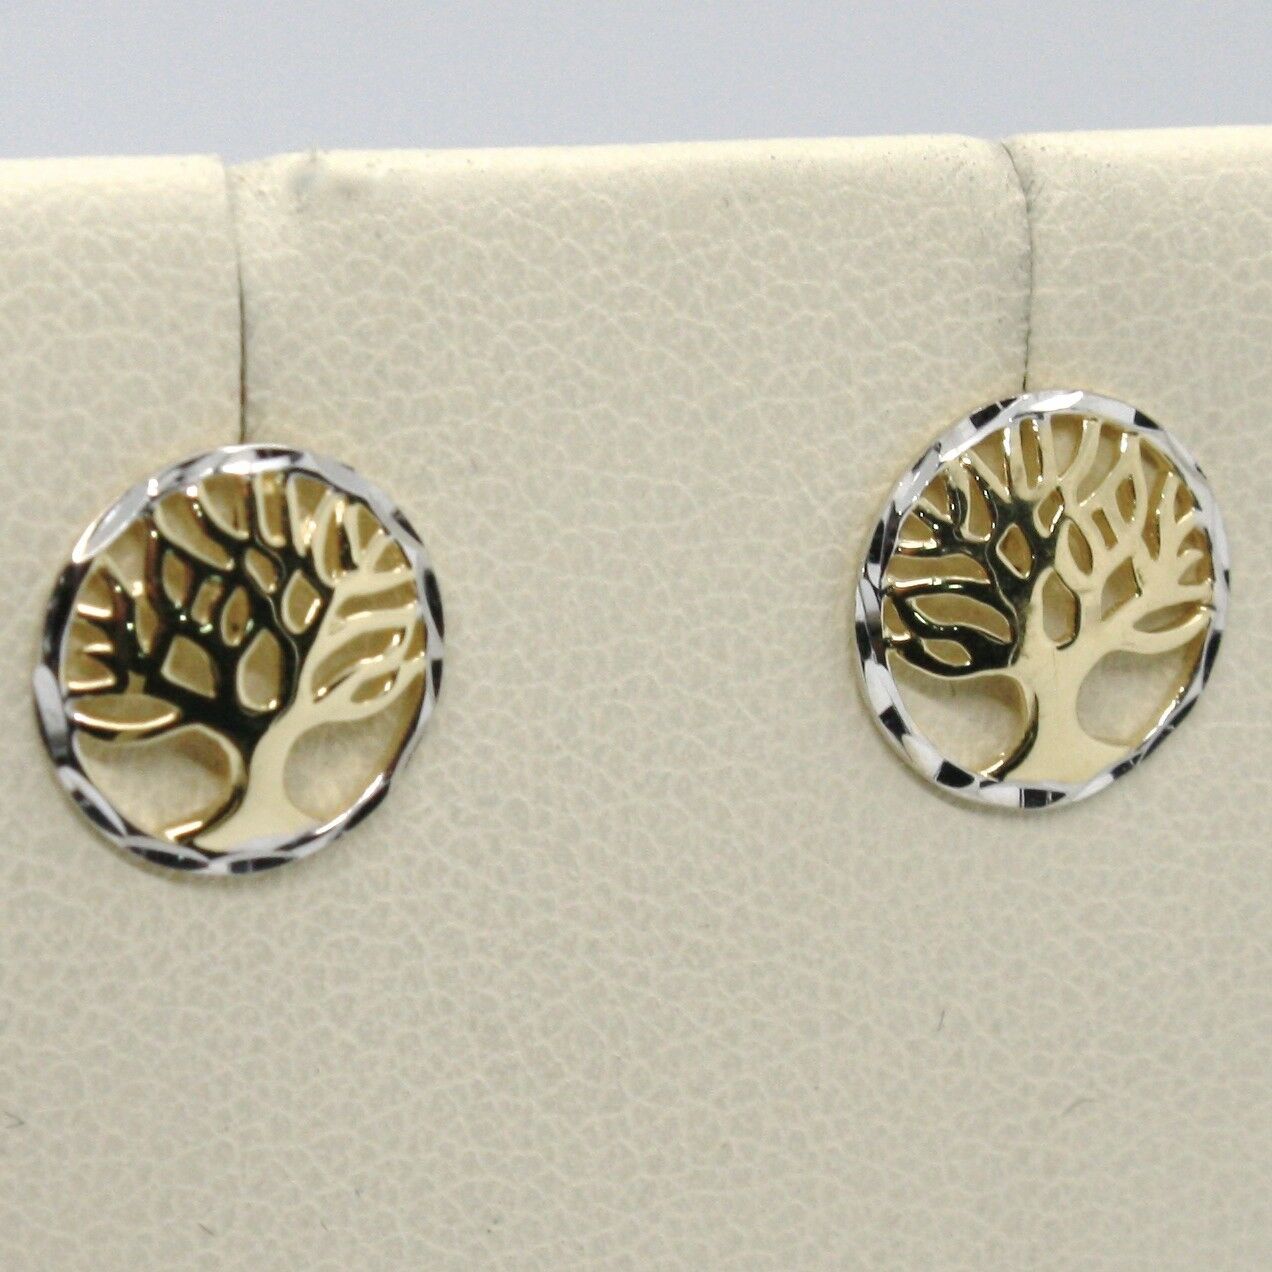 Primary image for 18K YELLOW & WHITE GOLD ROUND EARRINGS BEAUTIFUL TREE OF LIFE, MADE IN ITALY